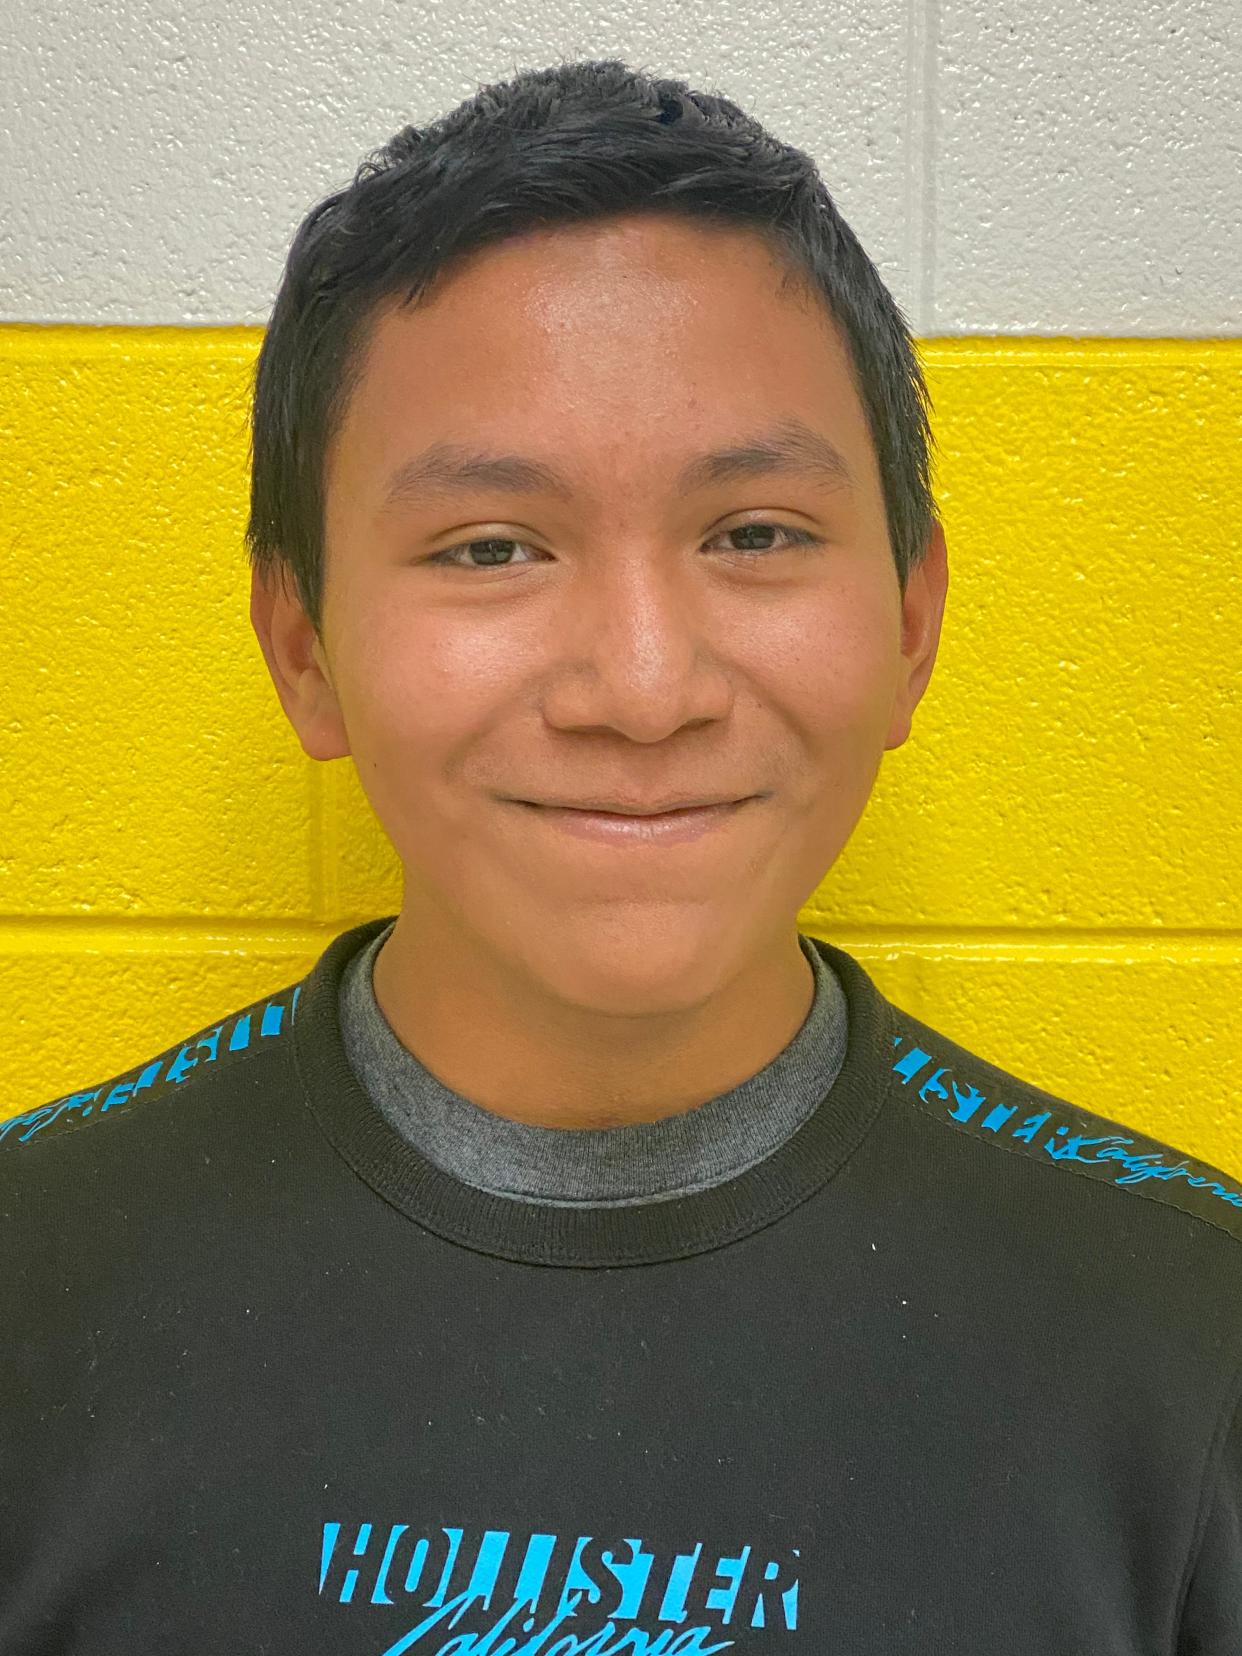 Apple Valley School eighth grader Christopher Hernandez-Montero is one of four grand prize winners in a national essay contest.